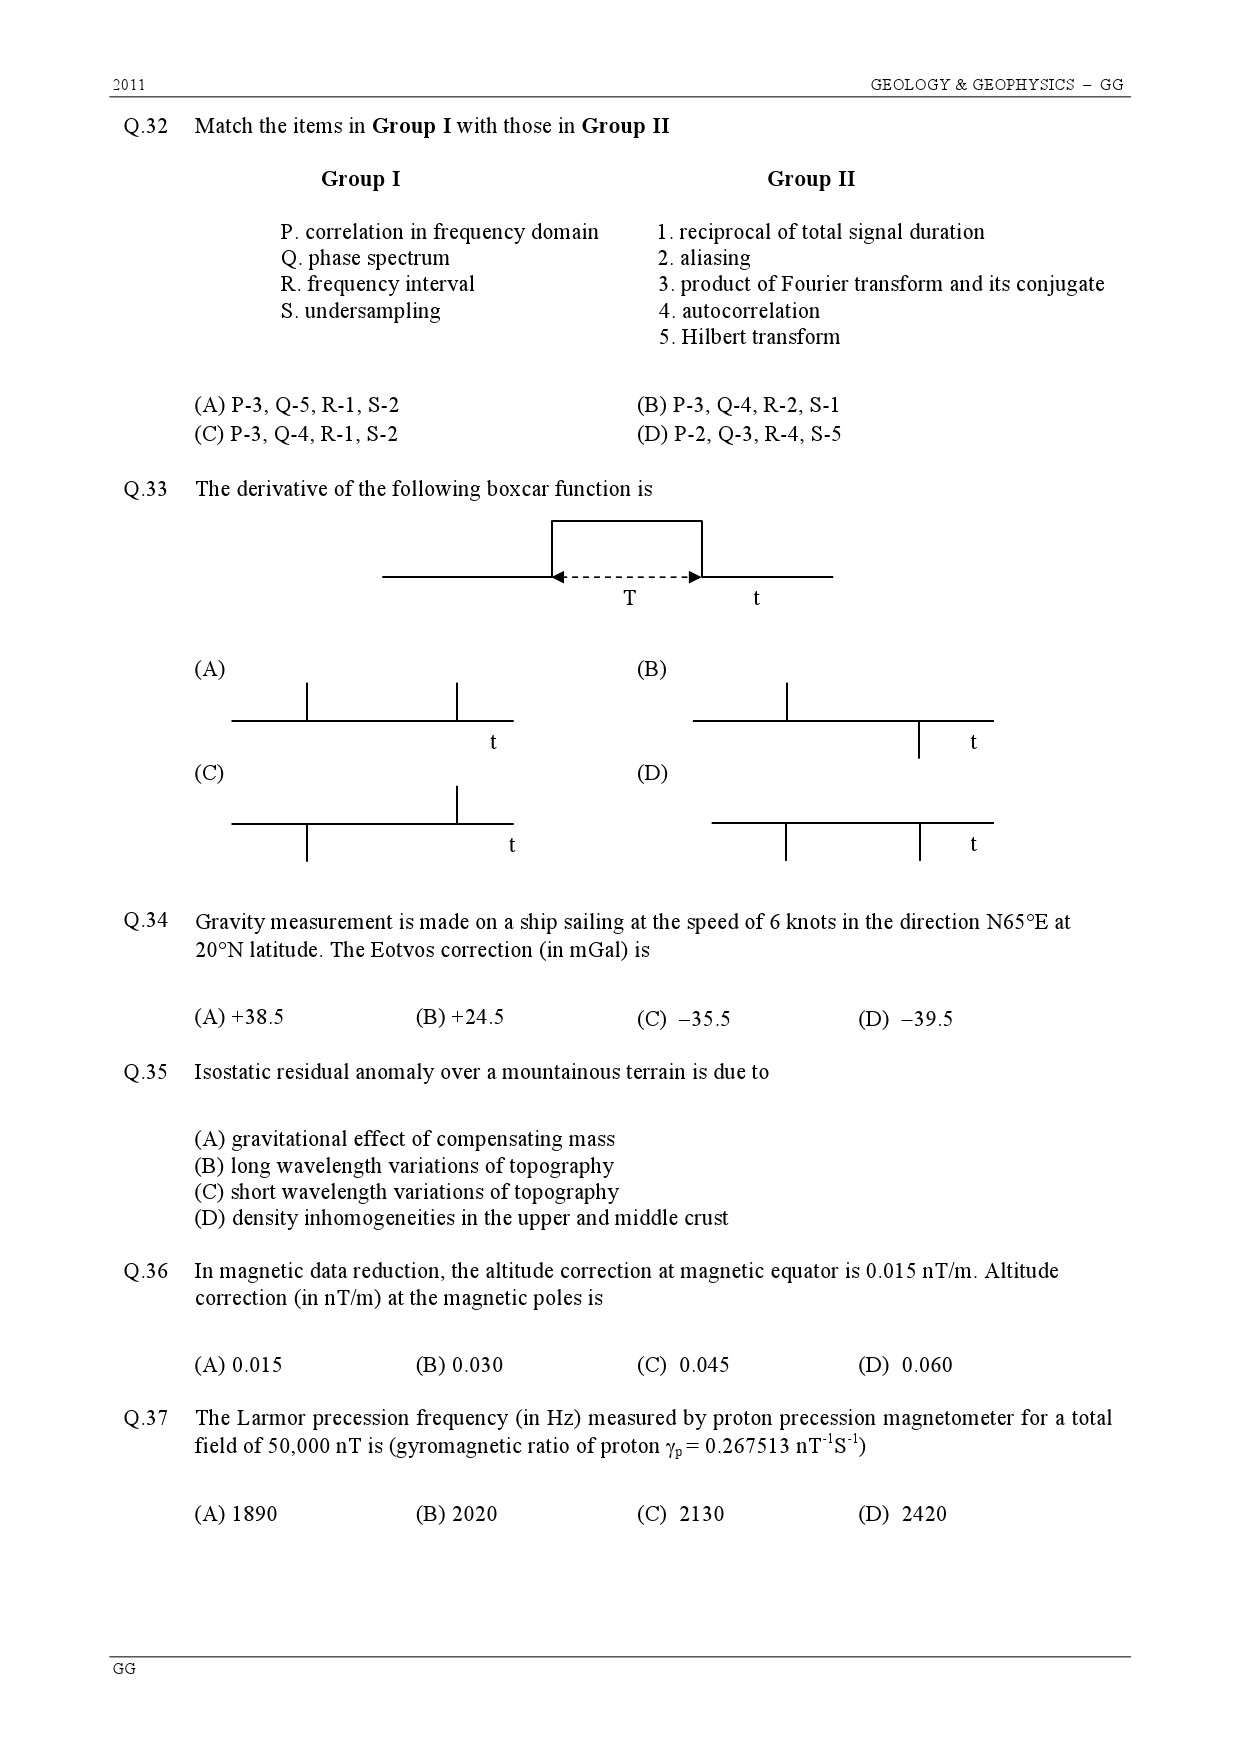 GATE Exam Question Paper 2011 Geology and Geophysics 12